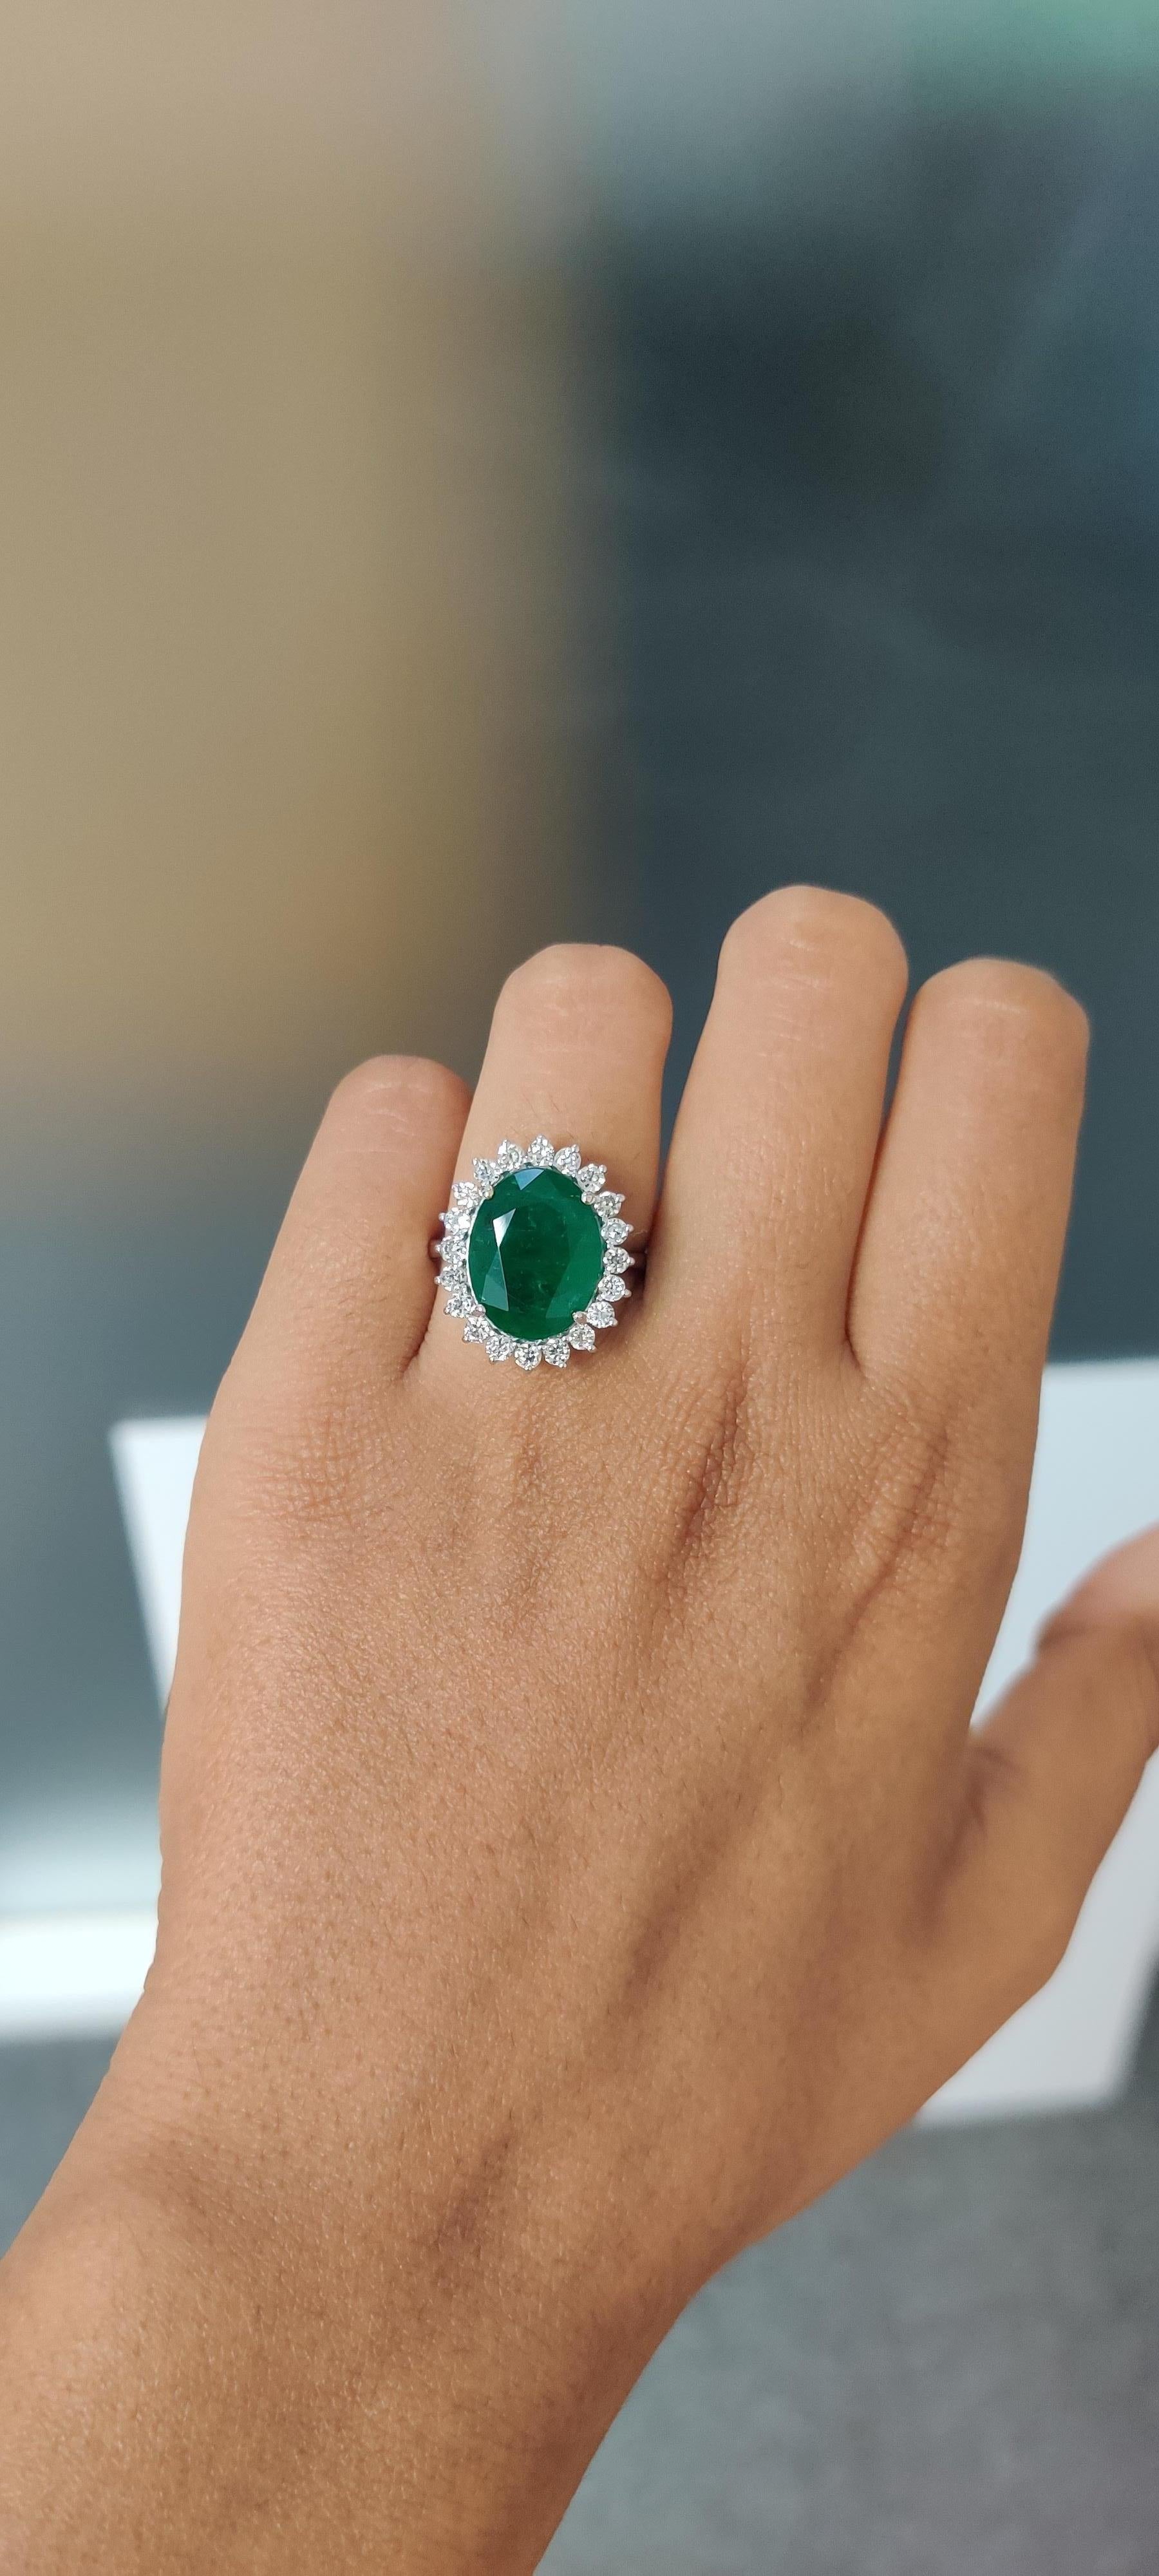 Christmas Special 7.11 Carat Zambian Emerald Ring with Old Cut Diamonds 1